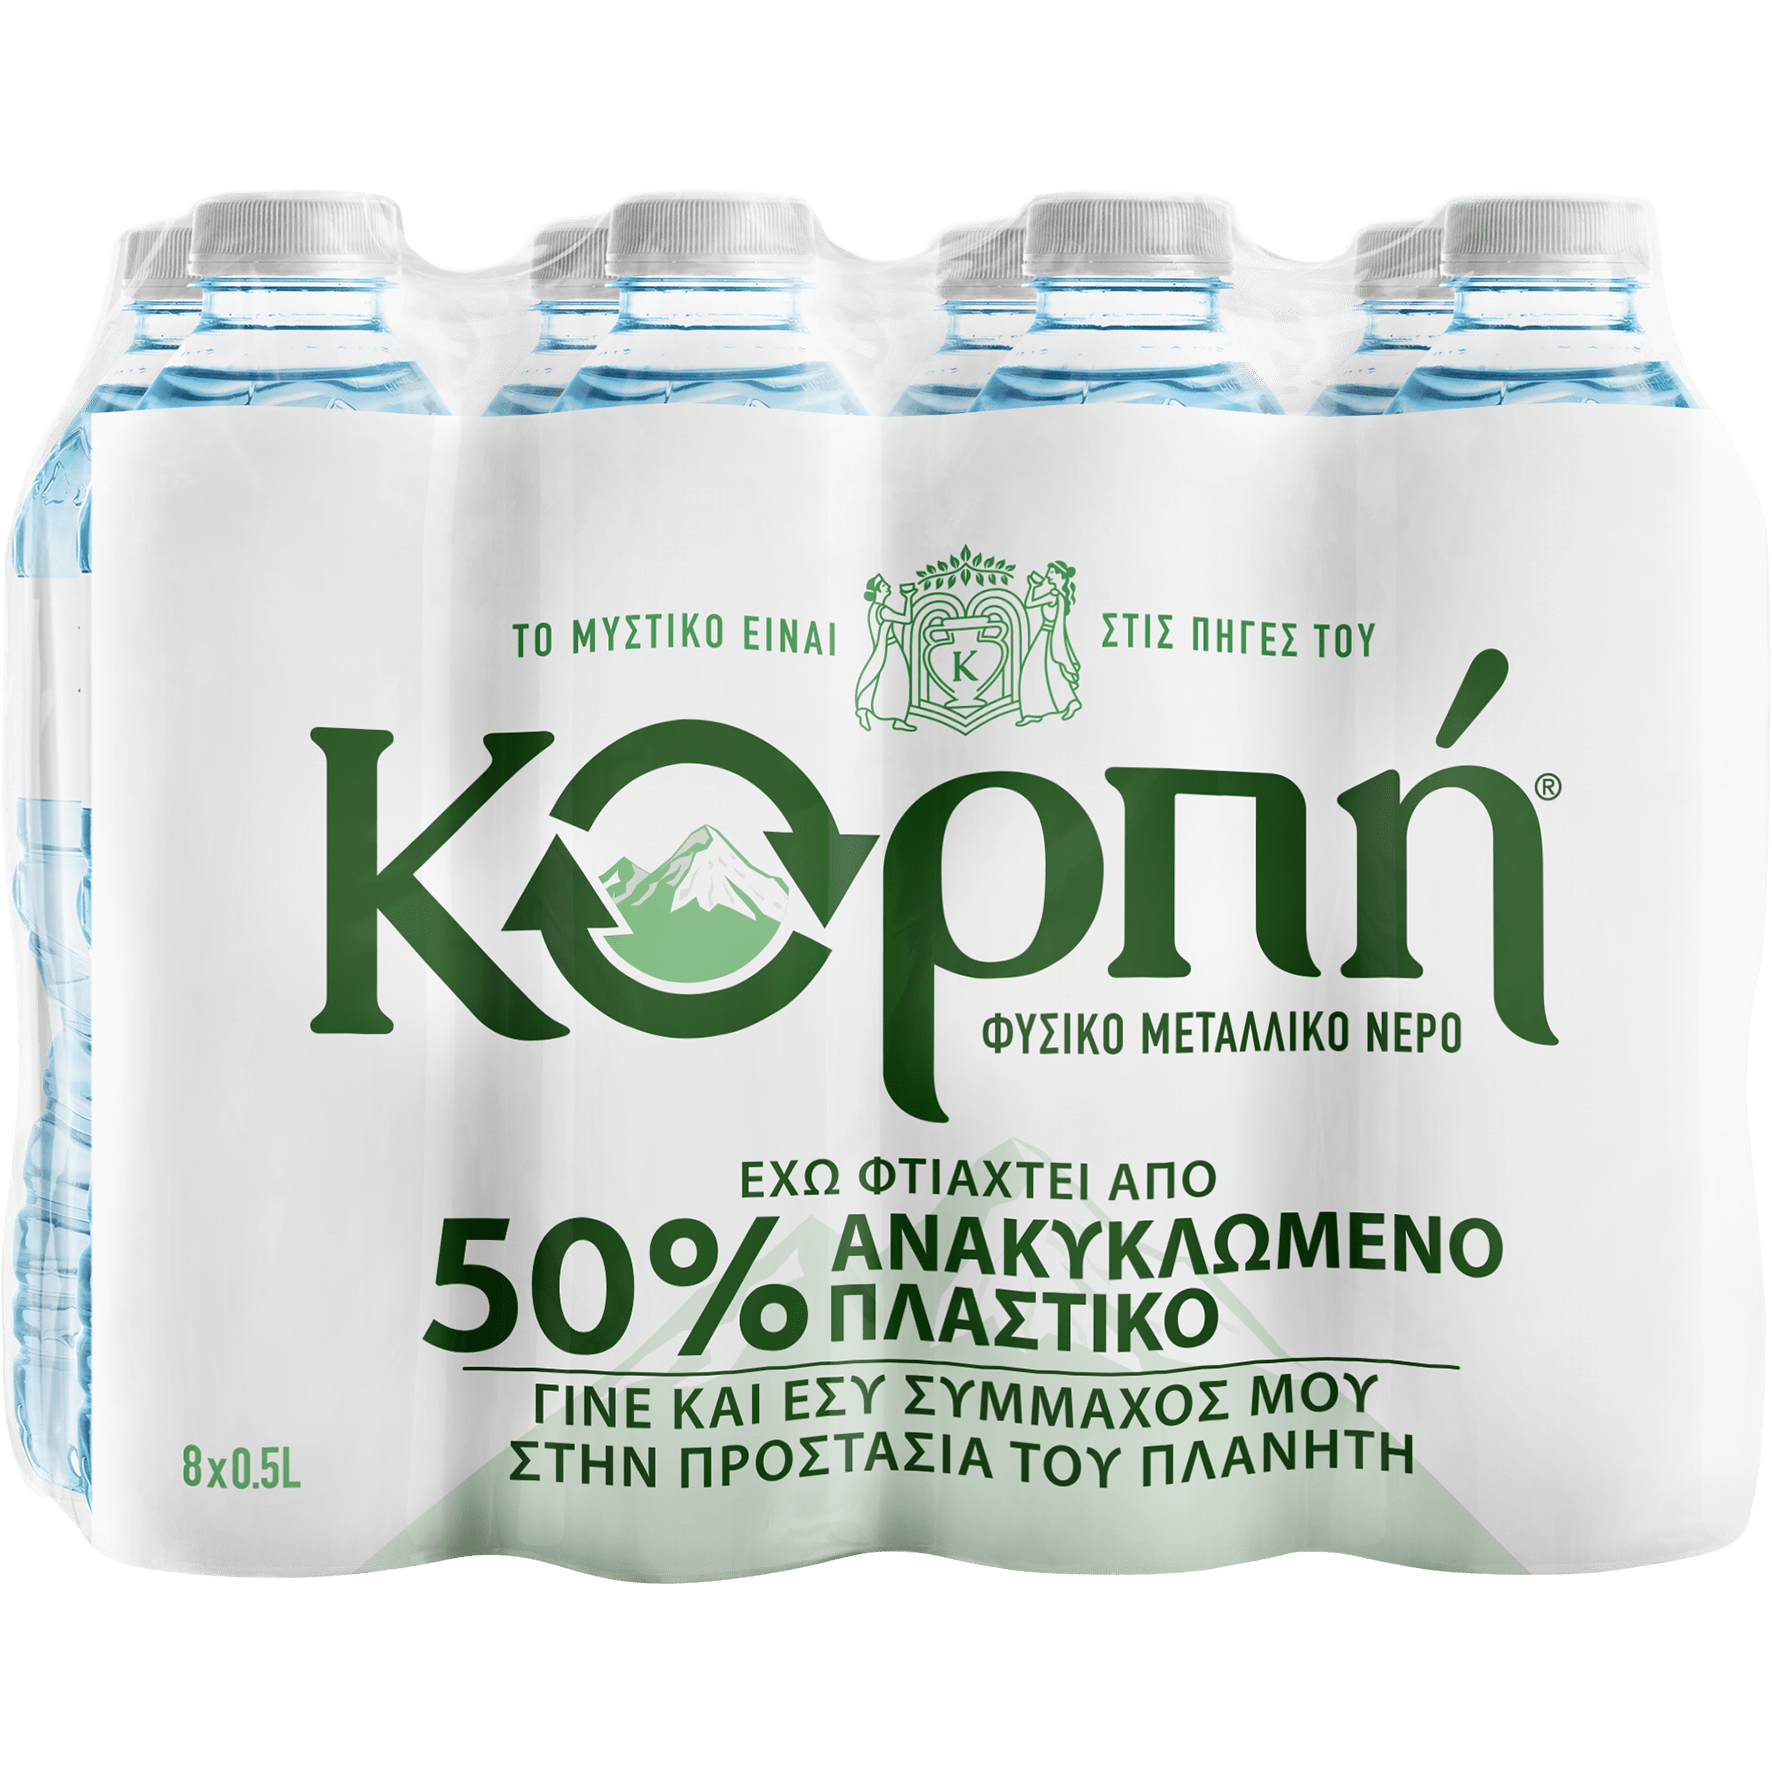 Natural mineral water 8x500ml